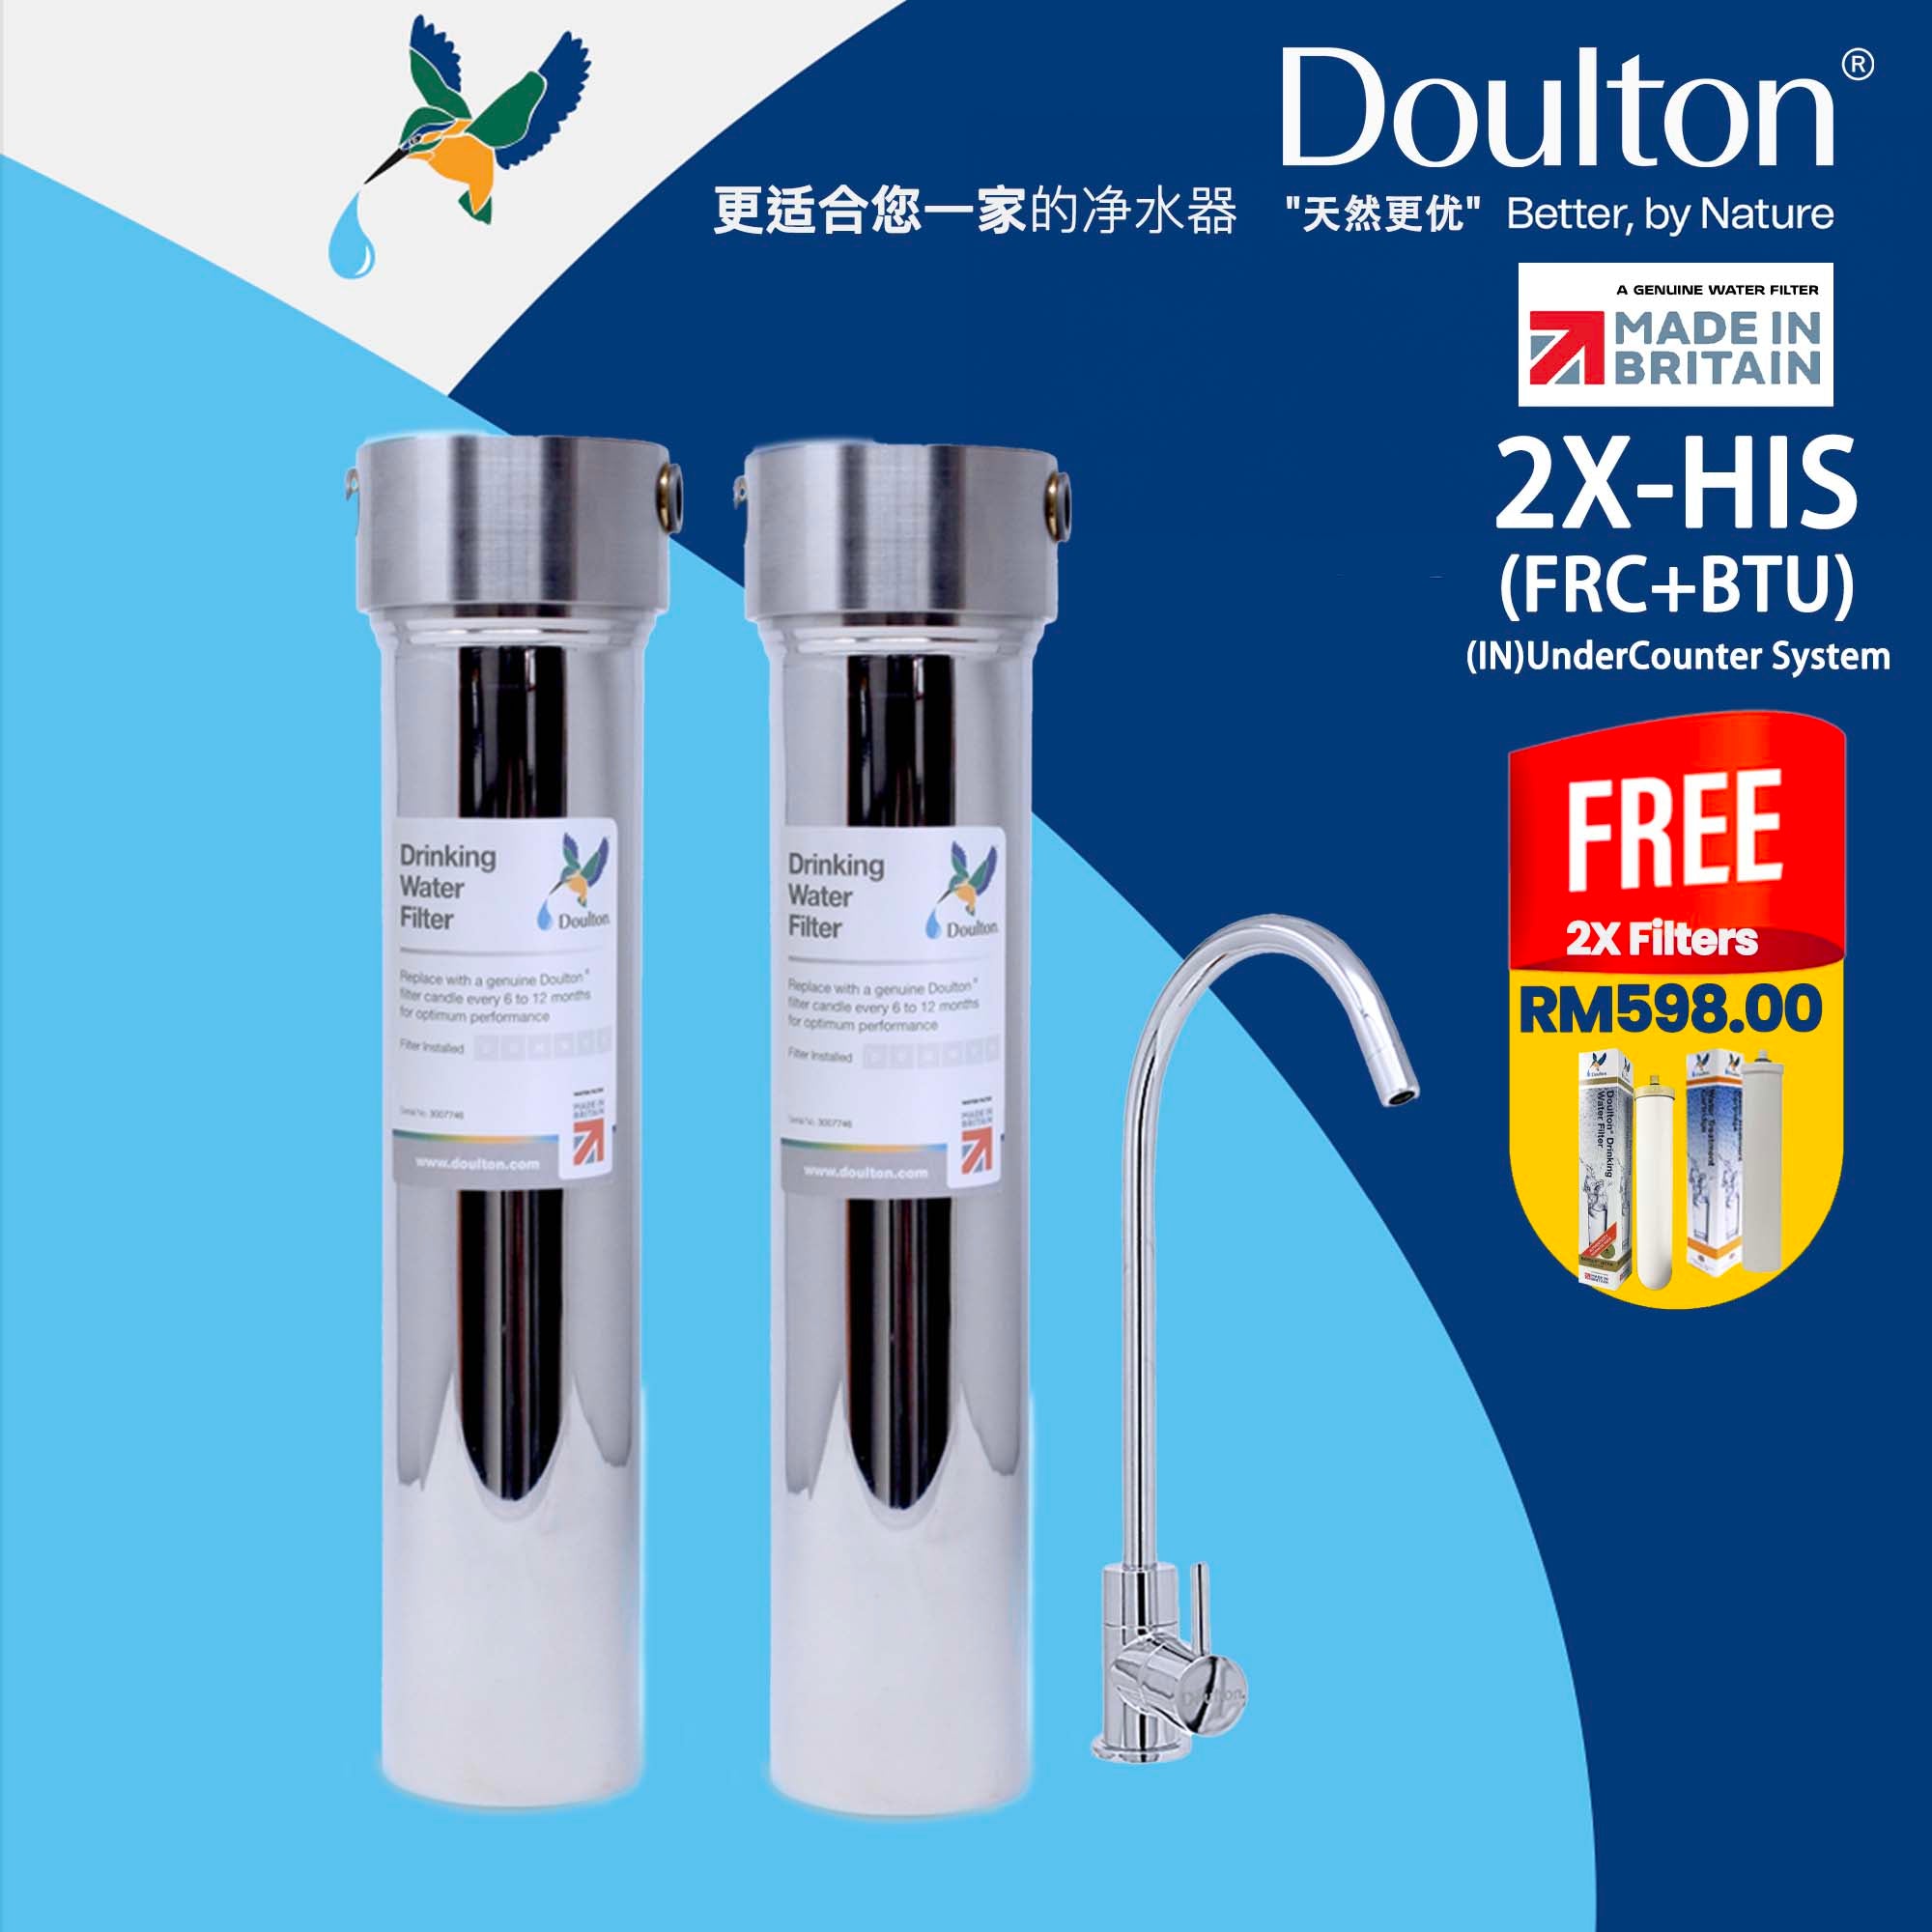 Discover Unmatched Purity with the Doulton 2X HIS Combo: The Ultimate Stainless Steel Undercounter Water Purification System with Fluoride Treatment/PFas(forever chemical) and NSF-Certified Biotect Ultra Filtration! *FREE Installation!